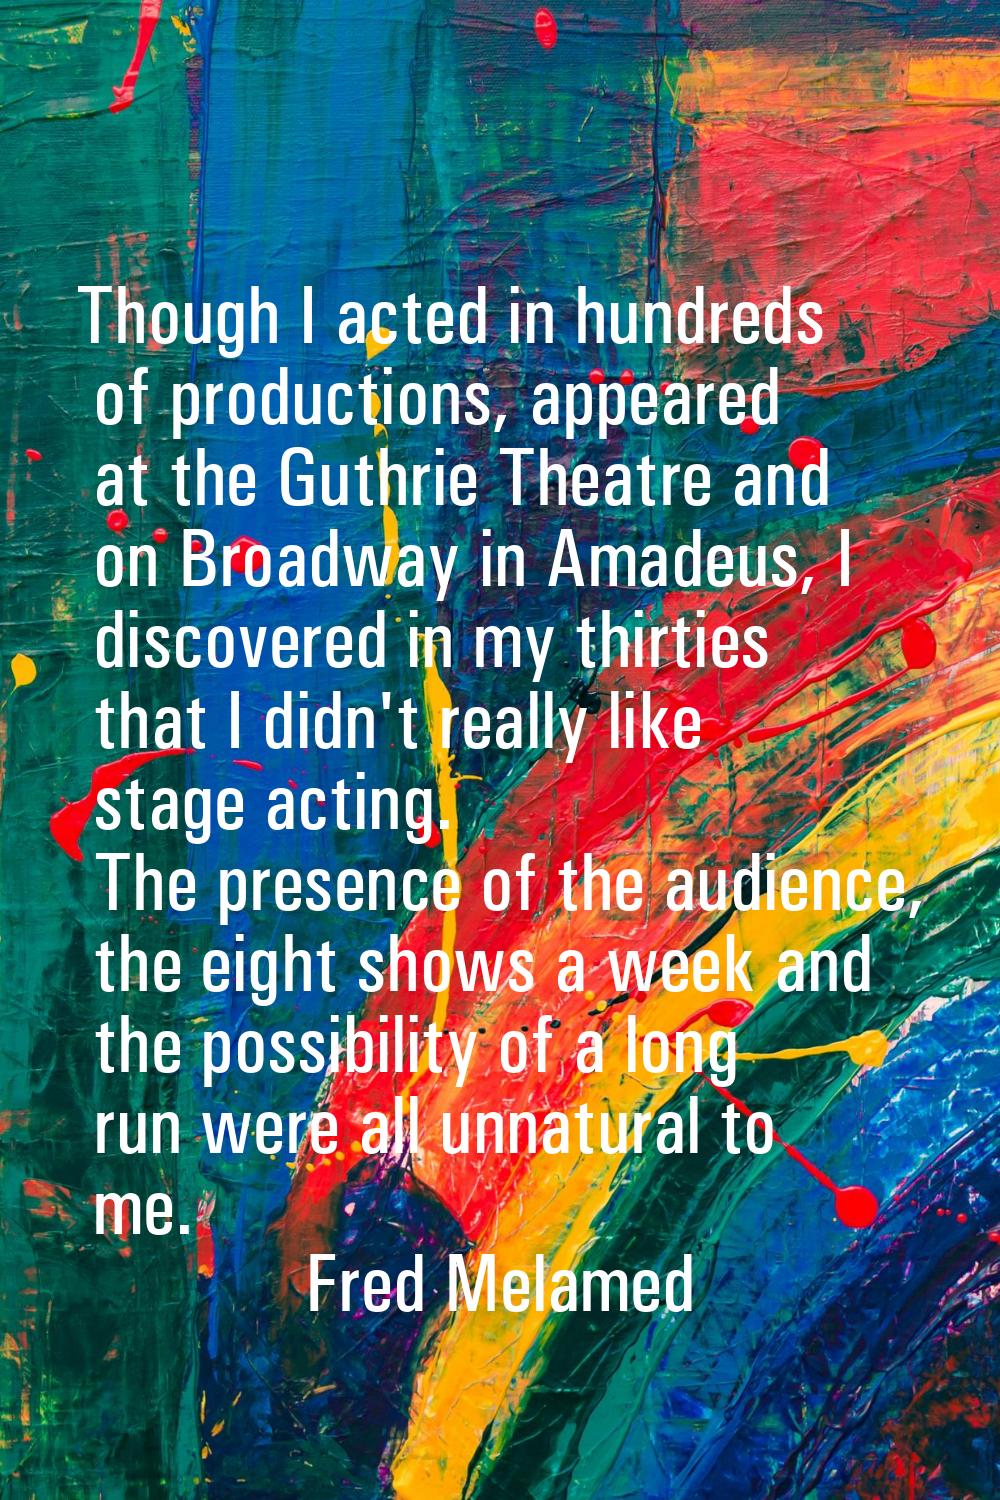 Though I acted in hundreds of productions, appeared at the Guthrie Theatre and on Broadway in Amade